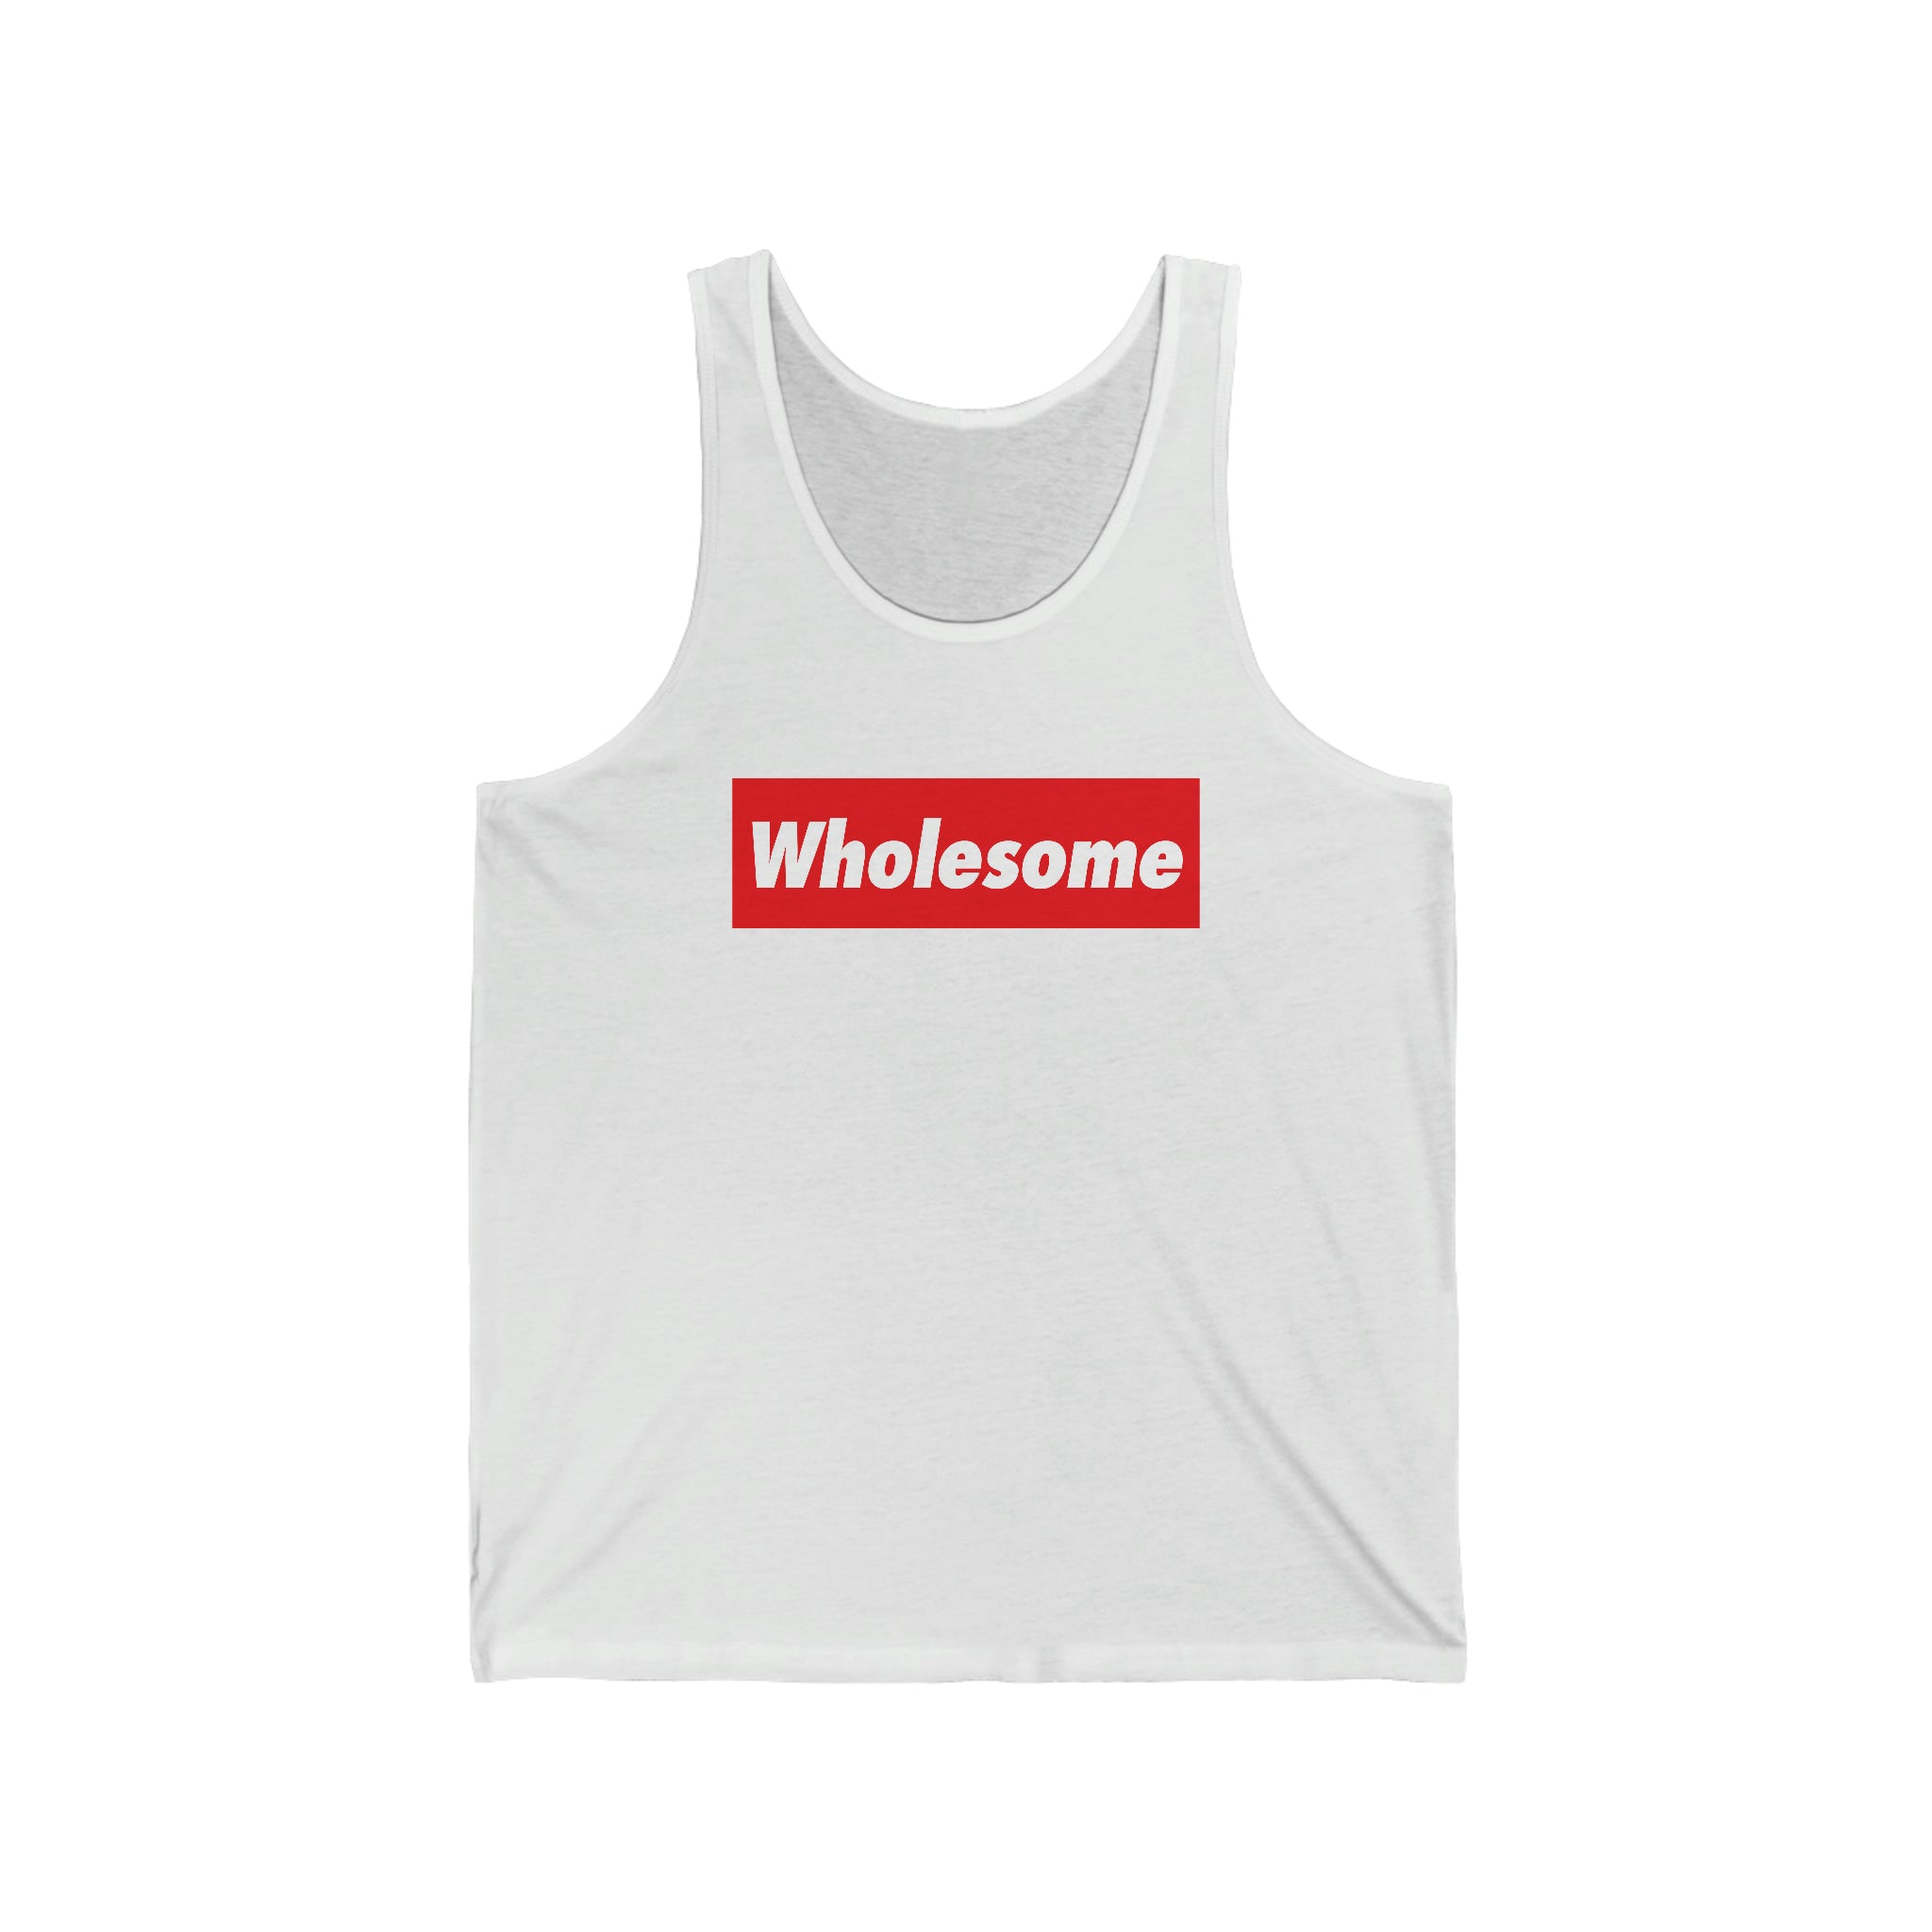 Wholesome Red Banner : Unisex 100% Cotton Tank